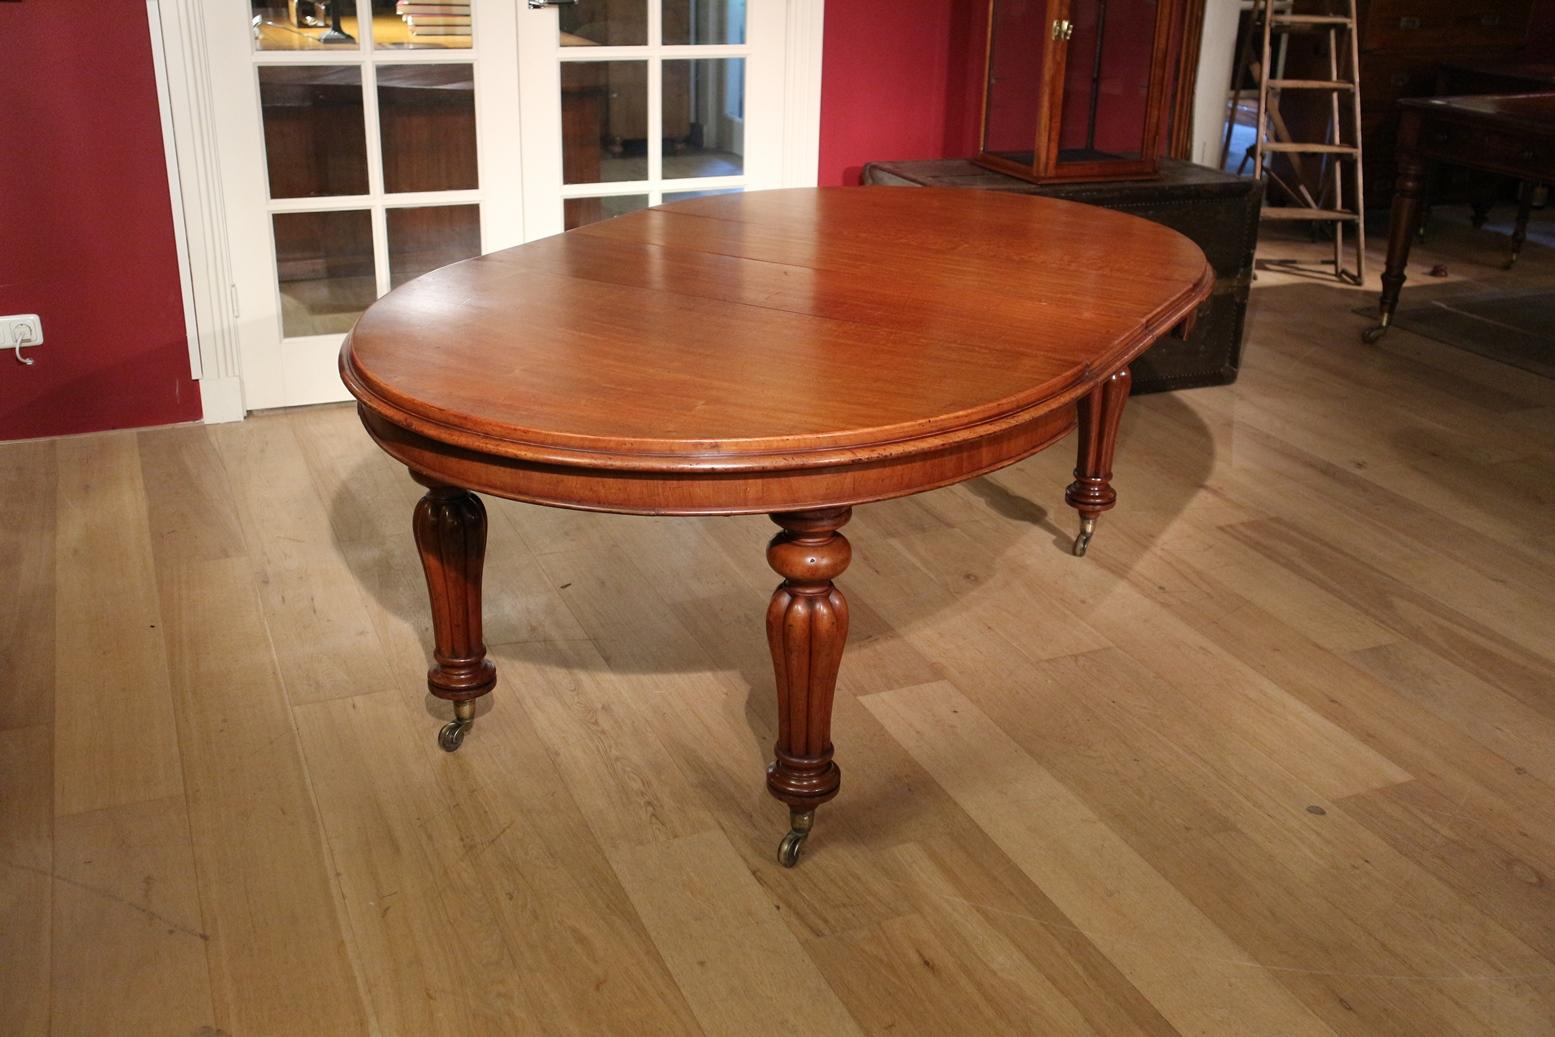 Beautiful antique oval mahogany dining room table with 2 original intermediate leaves. The table is in completely original condition. Stands on brass wheels. The table is low as is the case with many antique tables from the Victorian era. However,